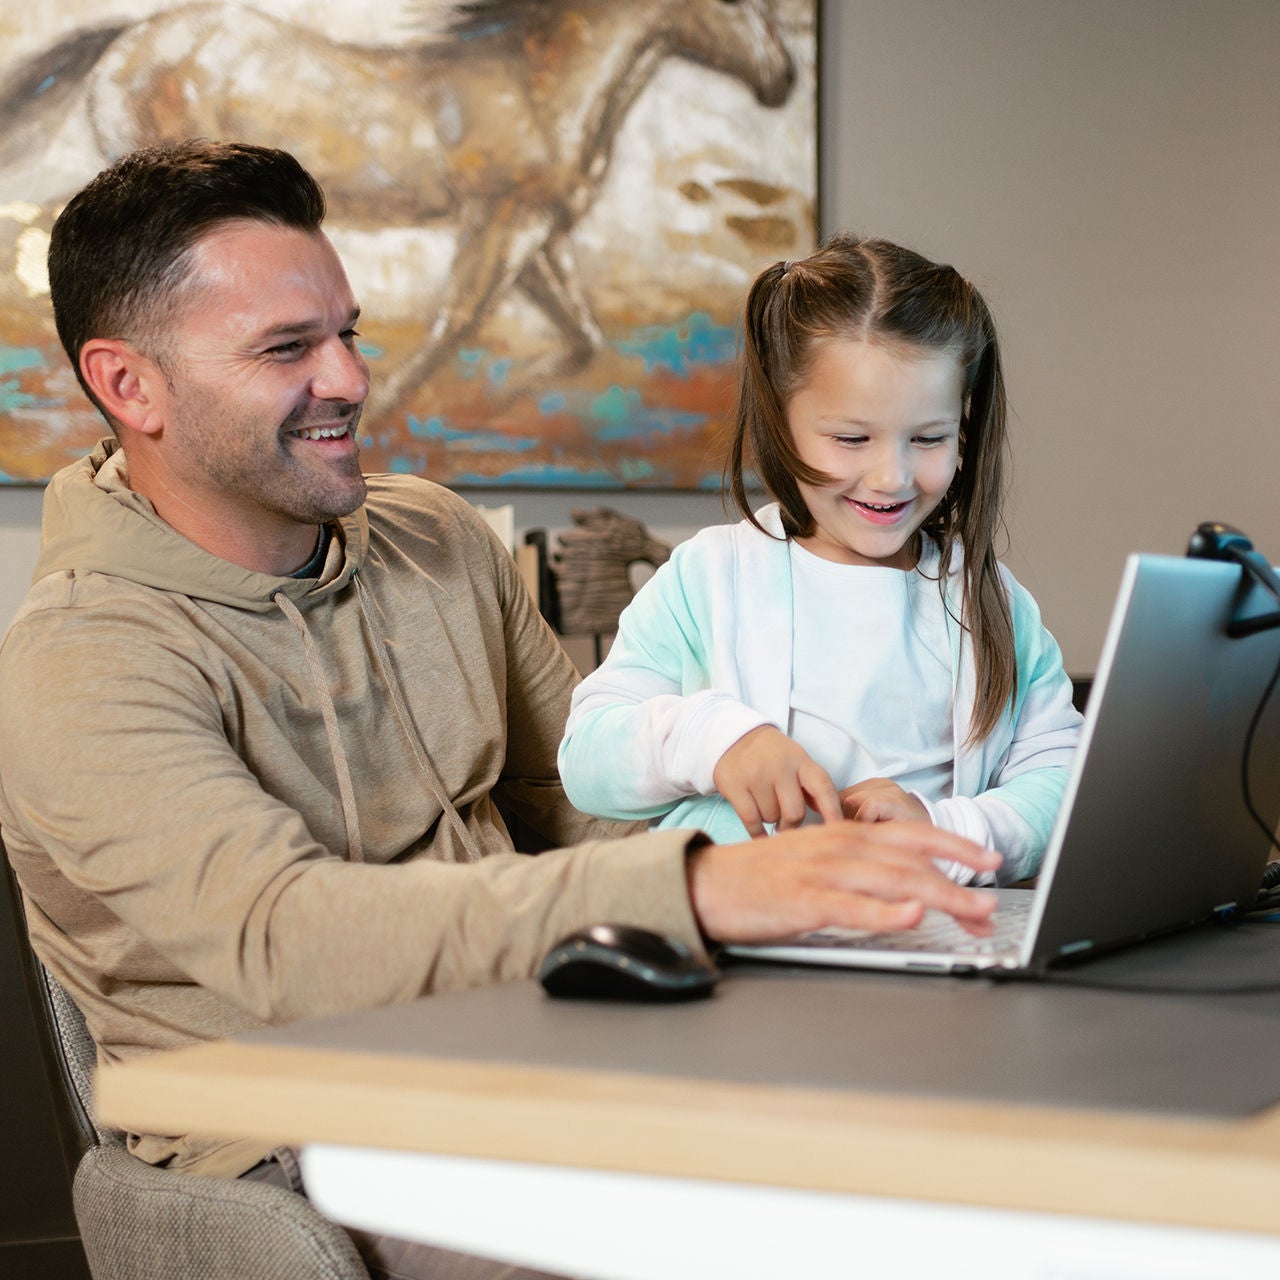 Father and daughter smiling while using a laptop